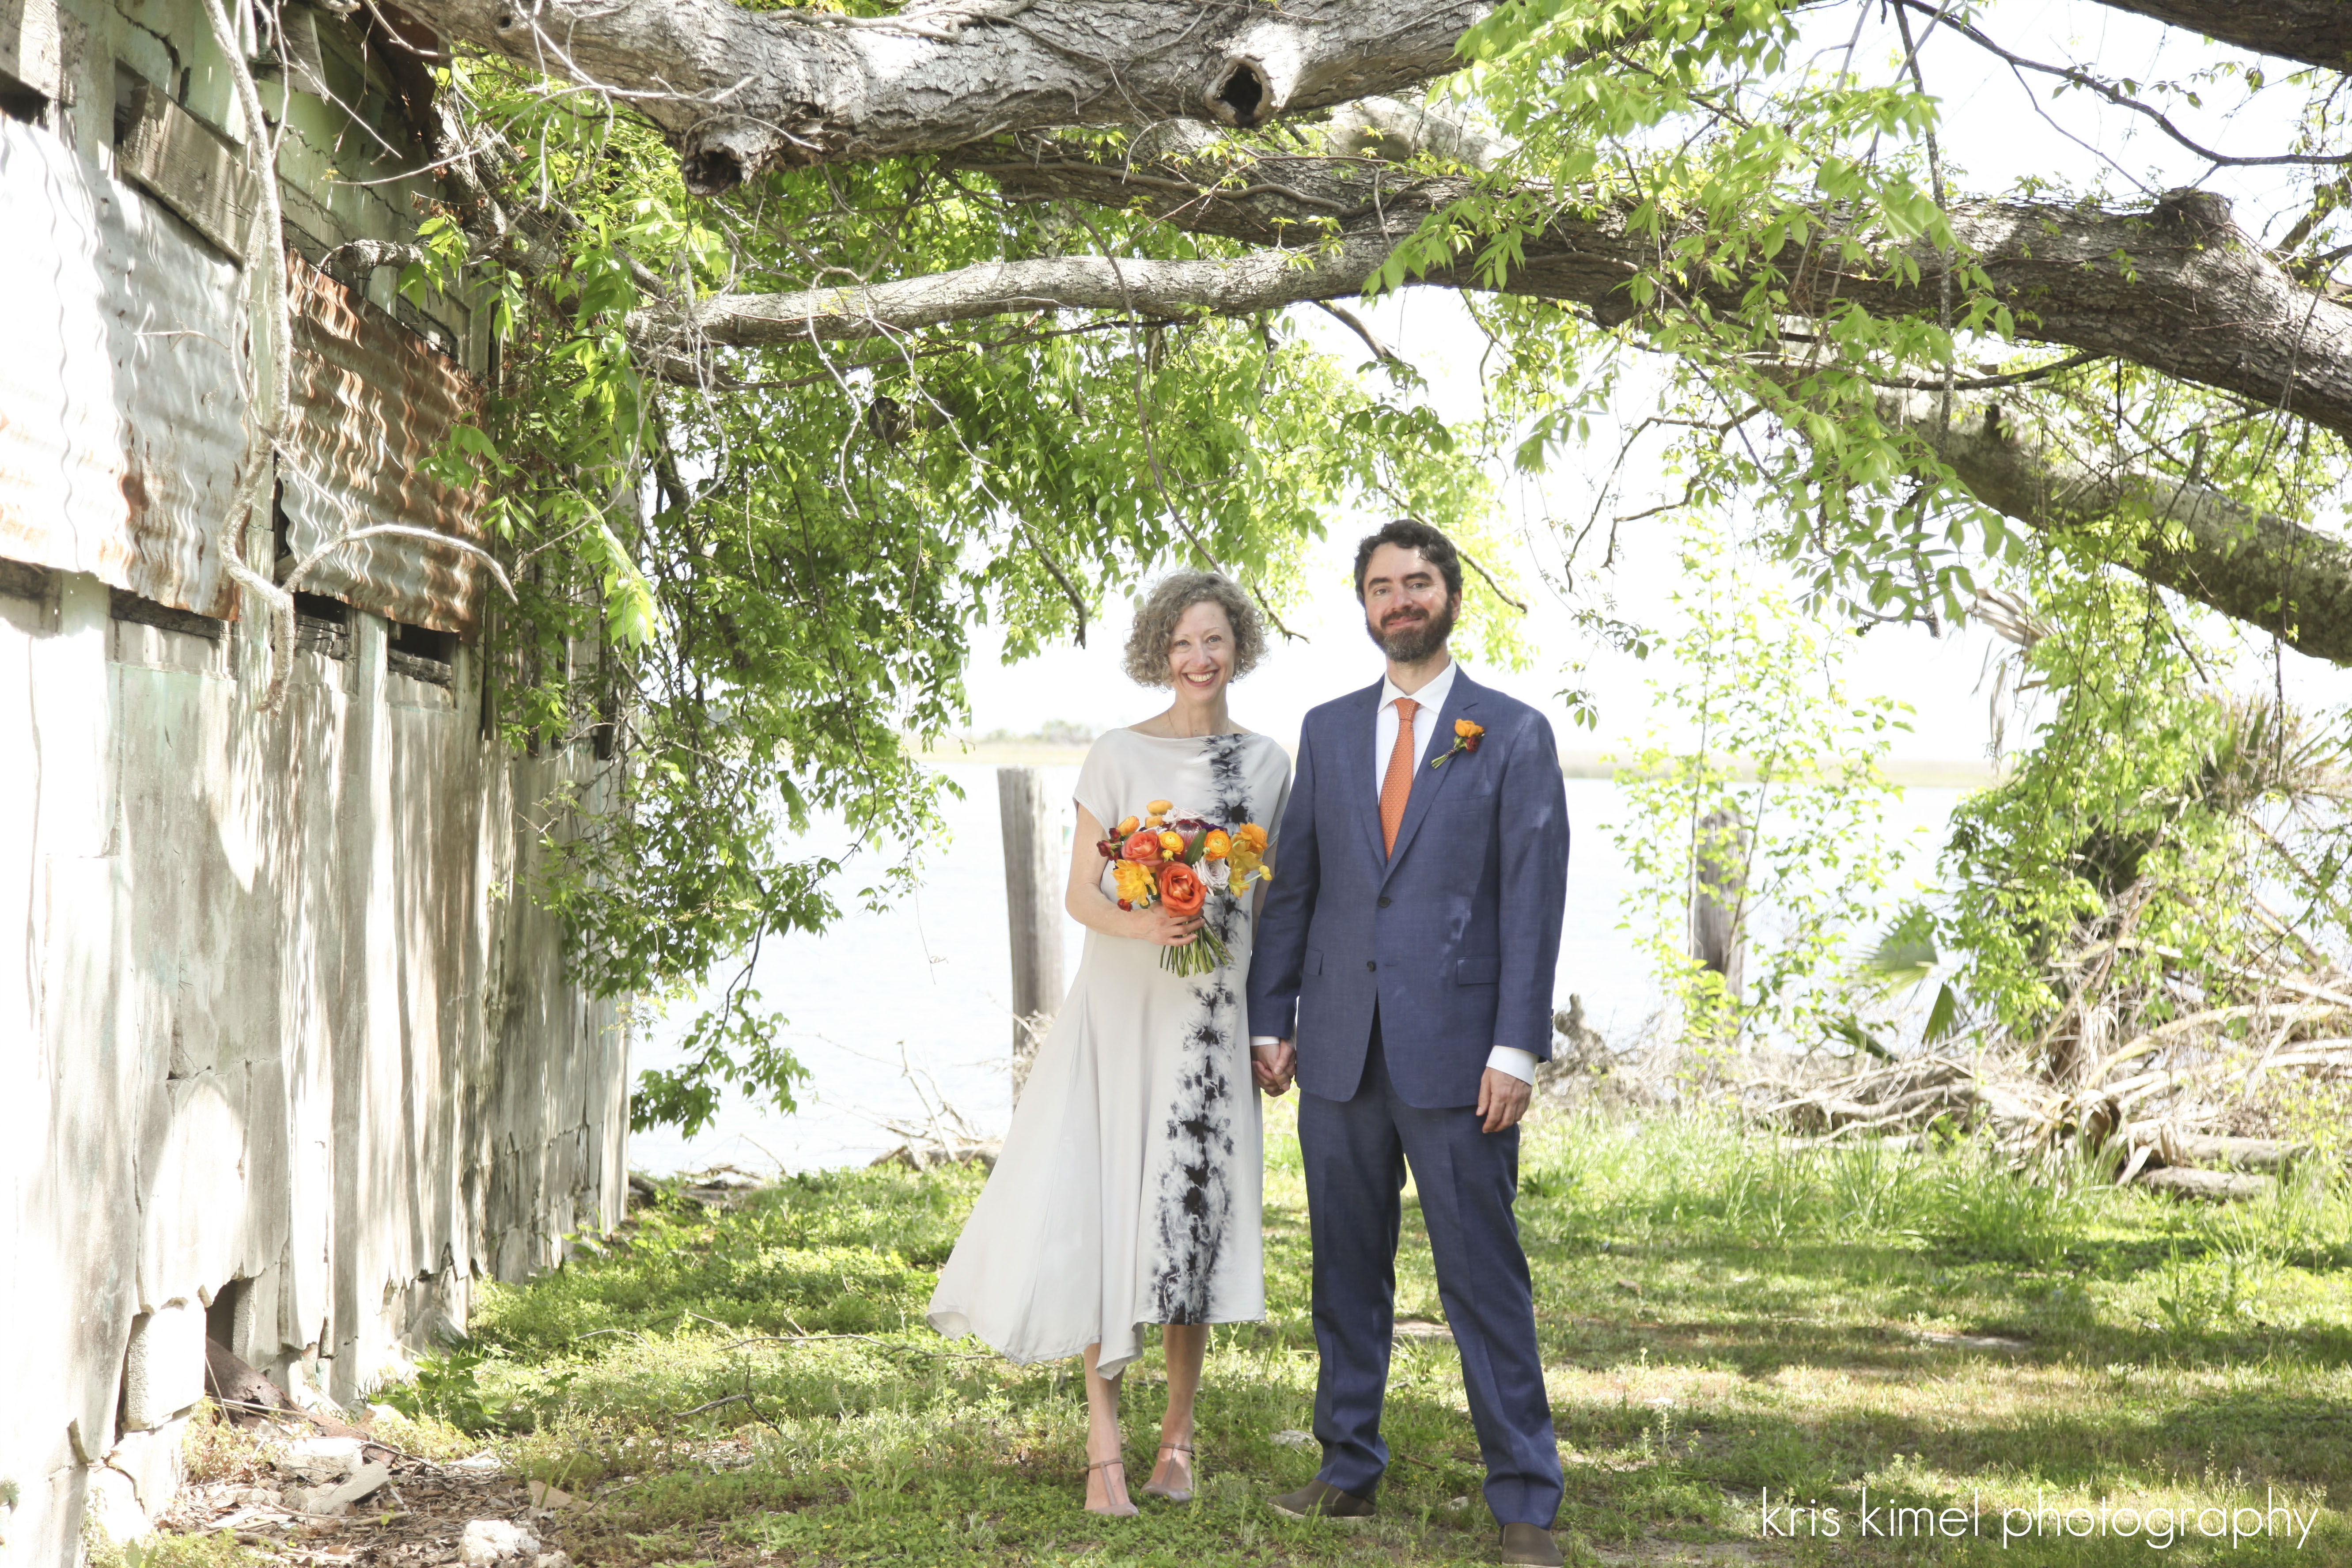 portrait of bride and groom by Kris Kimel Photography in Apalachicola, FL